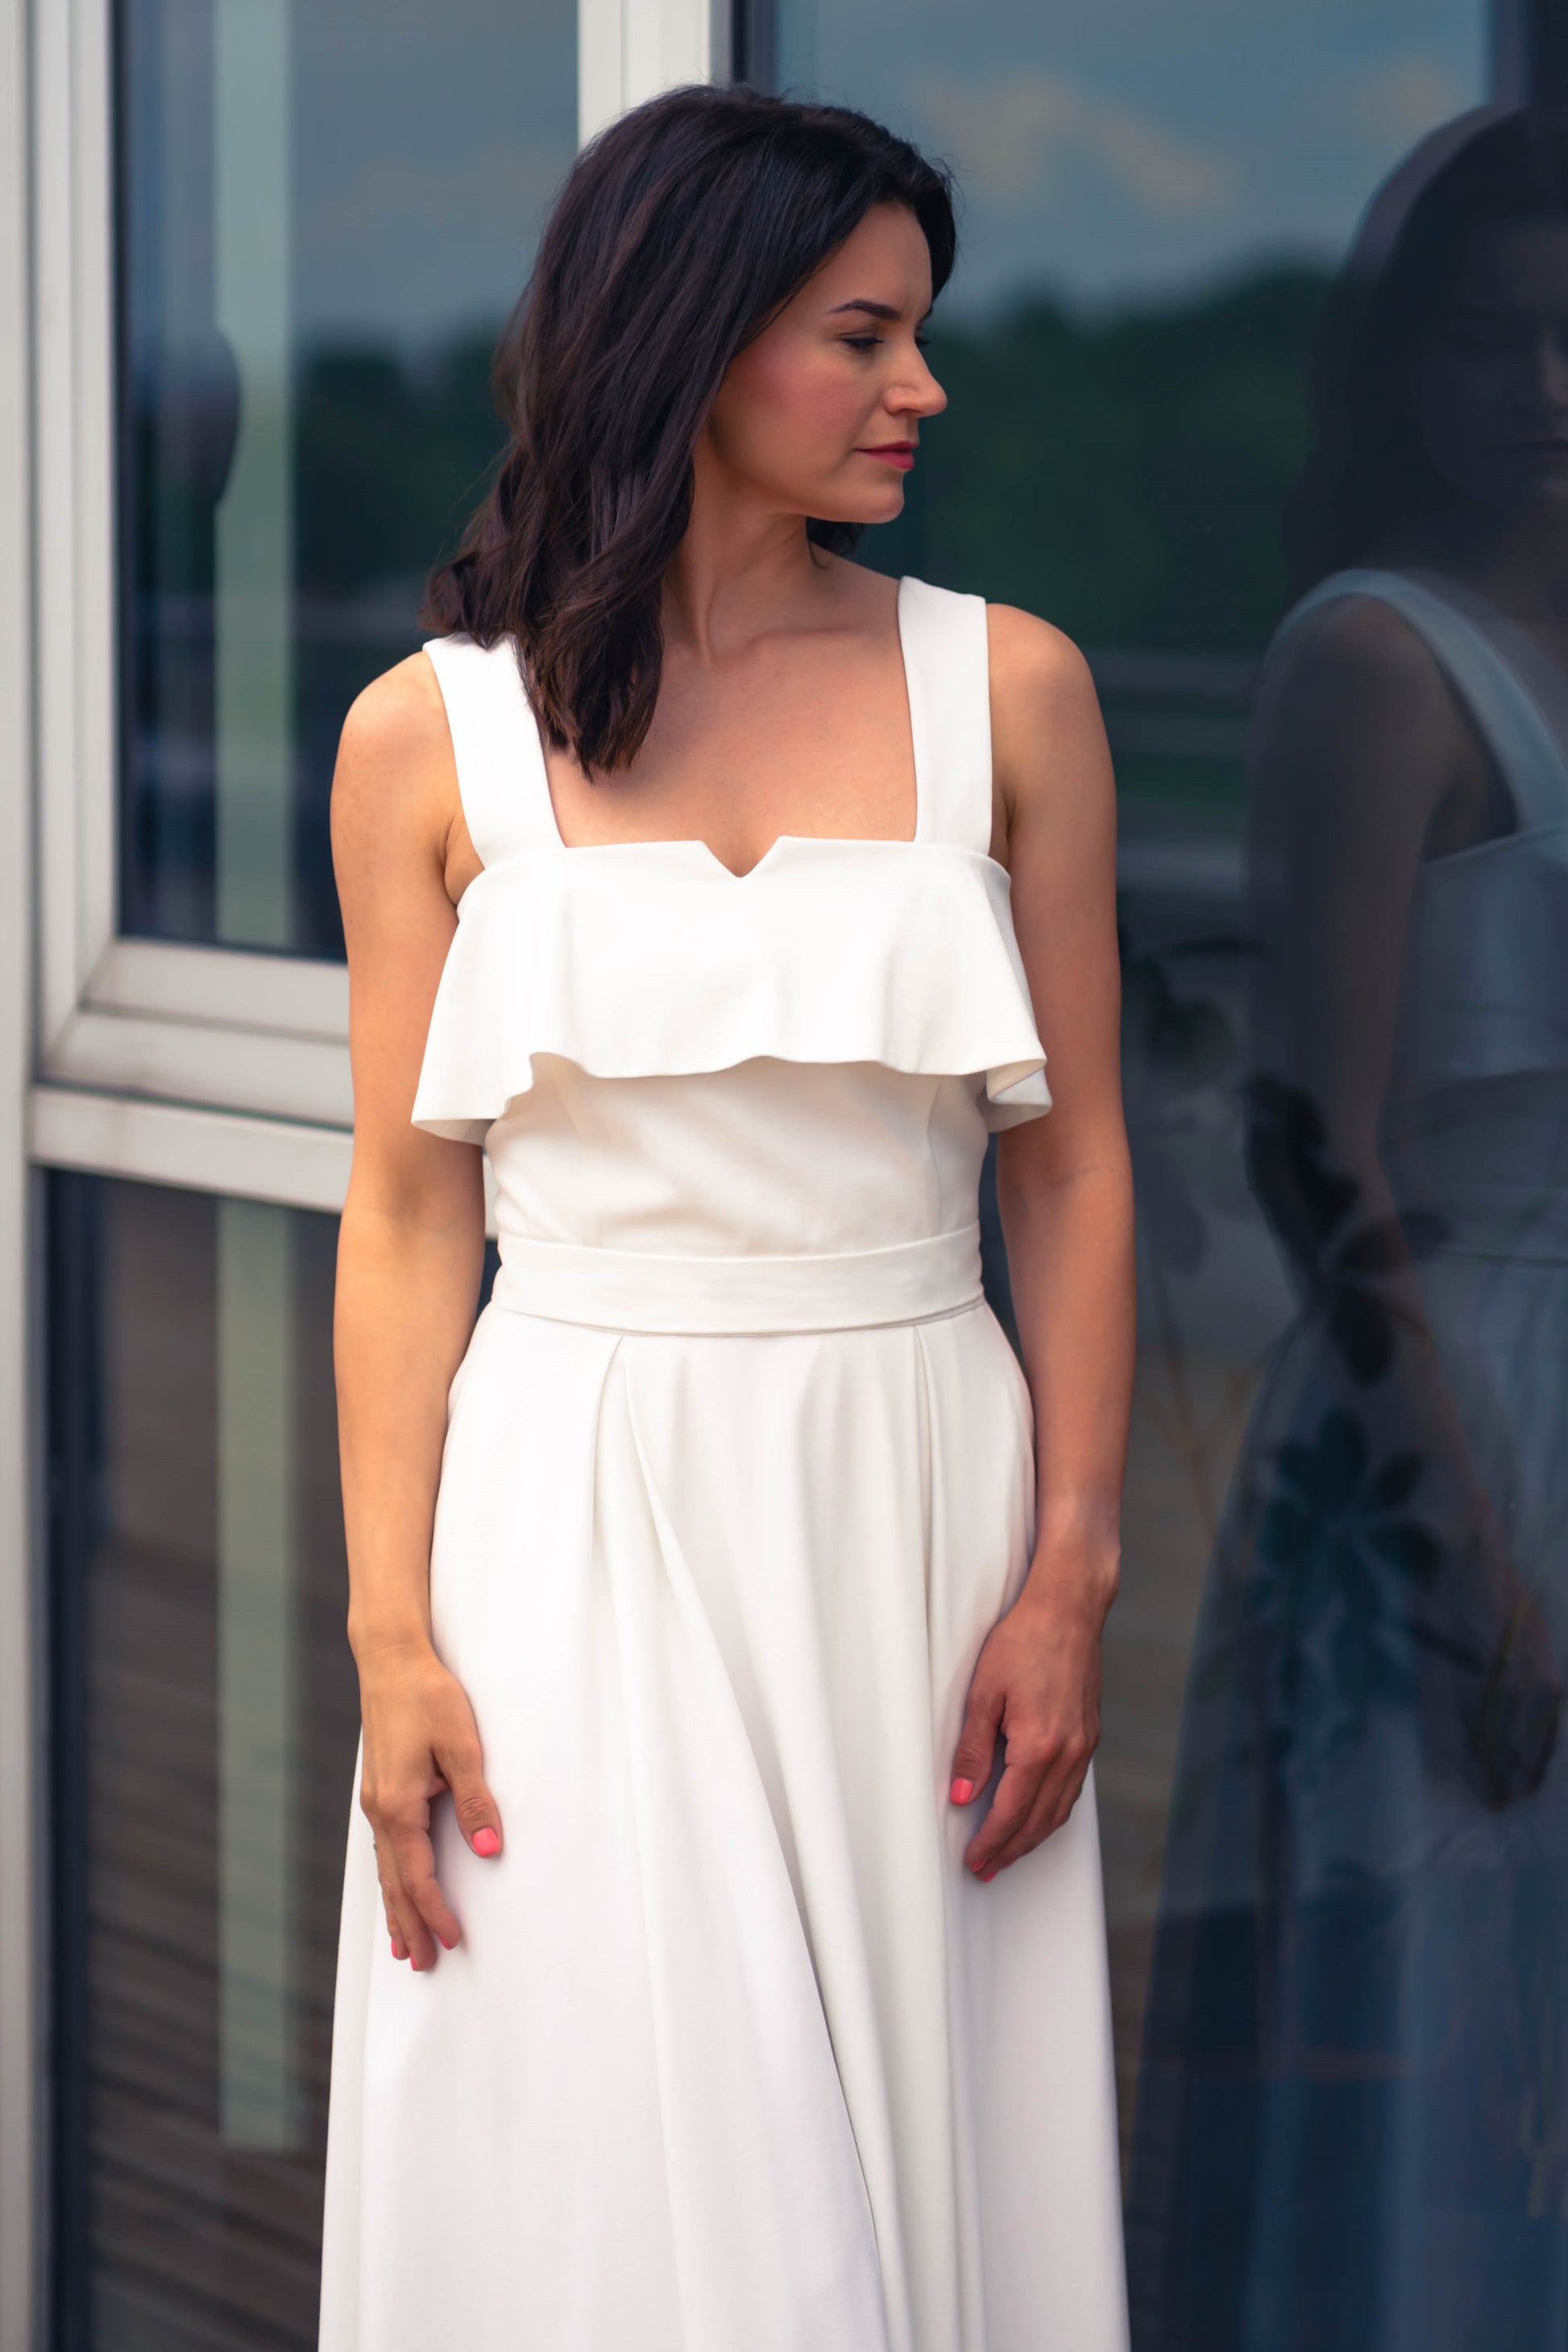 beautiful woman in a white two piece dress with corset top with a ruffle over the breast seam and long flowy skirt